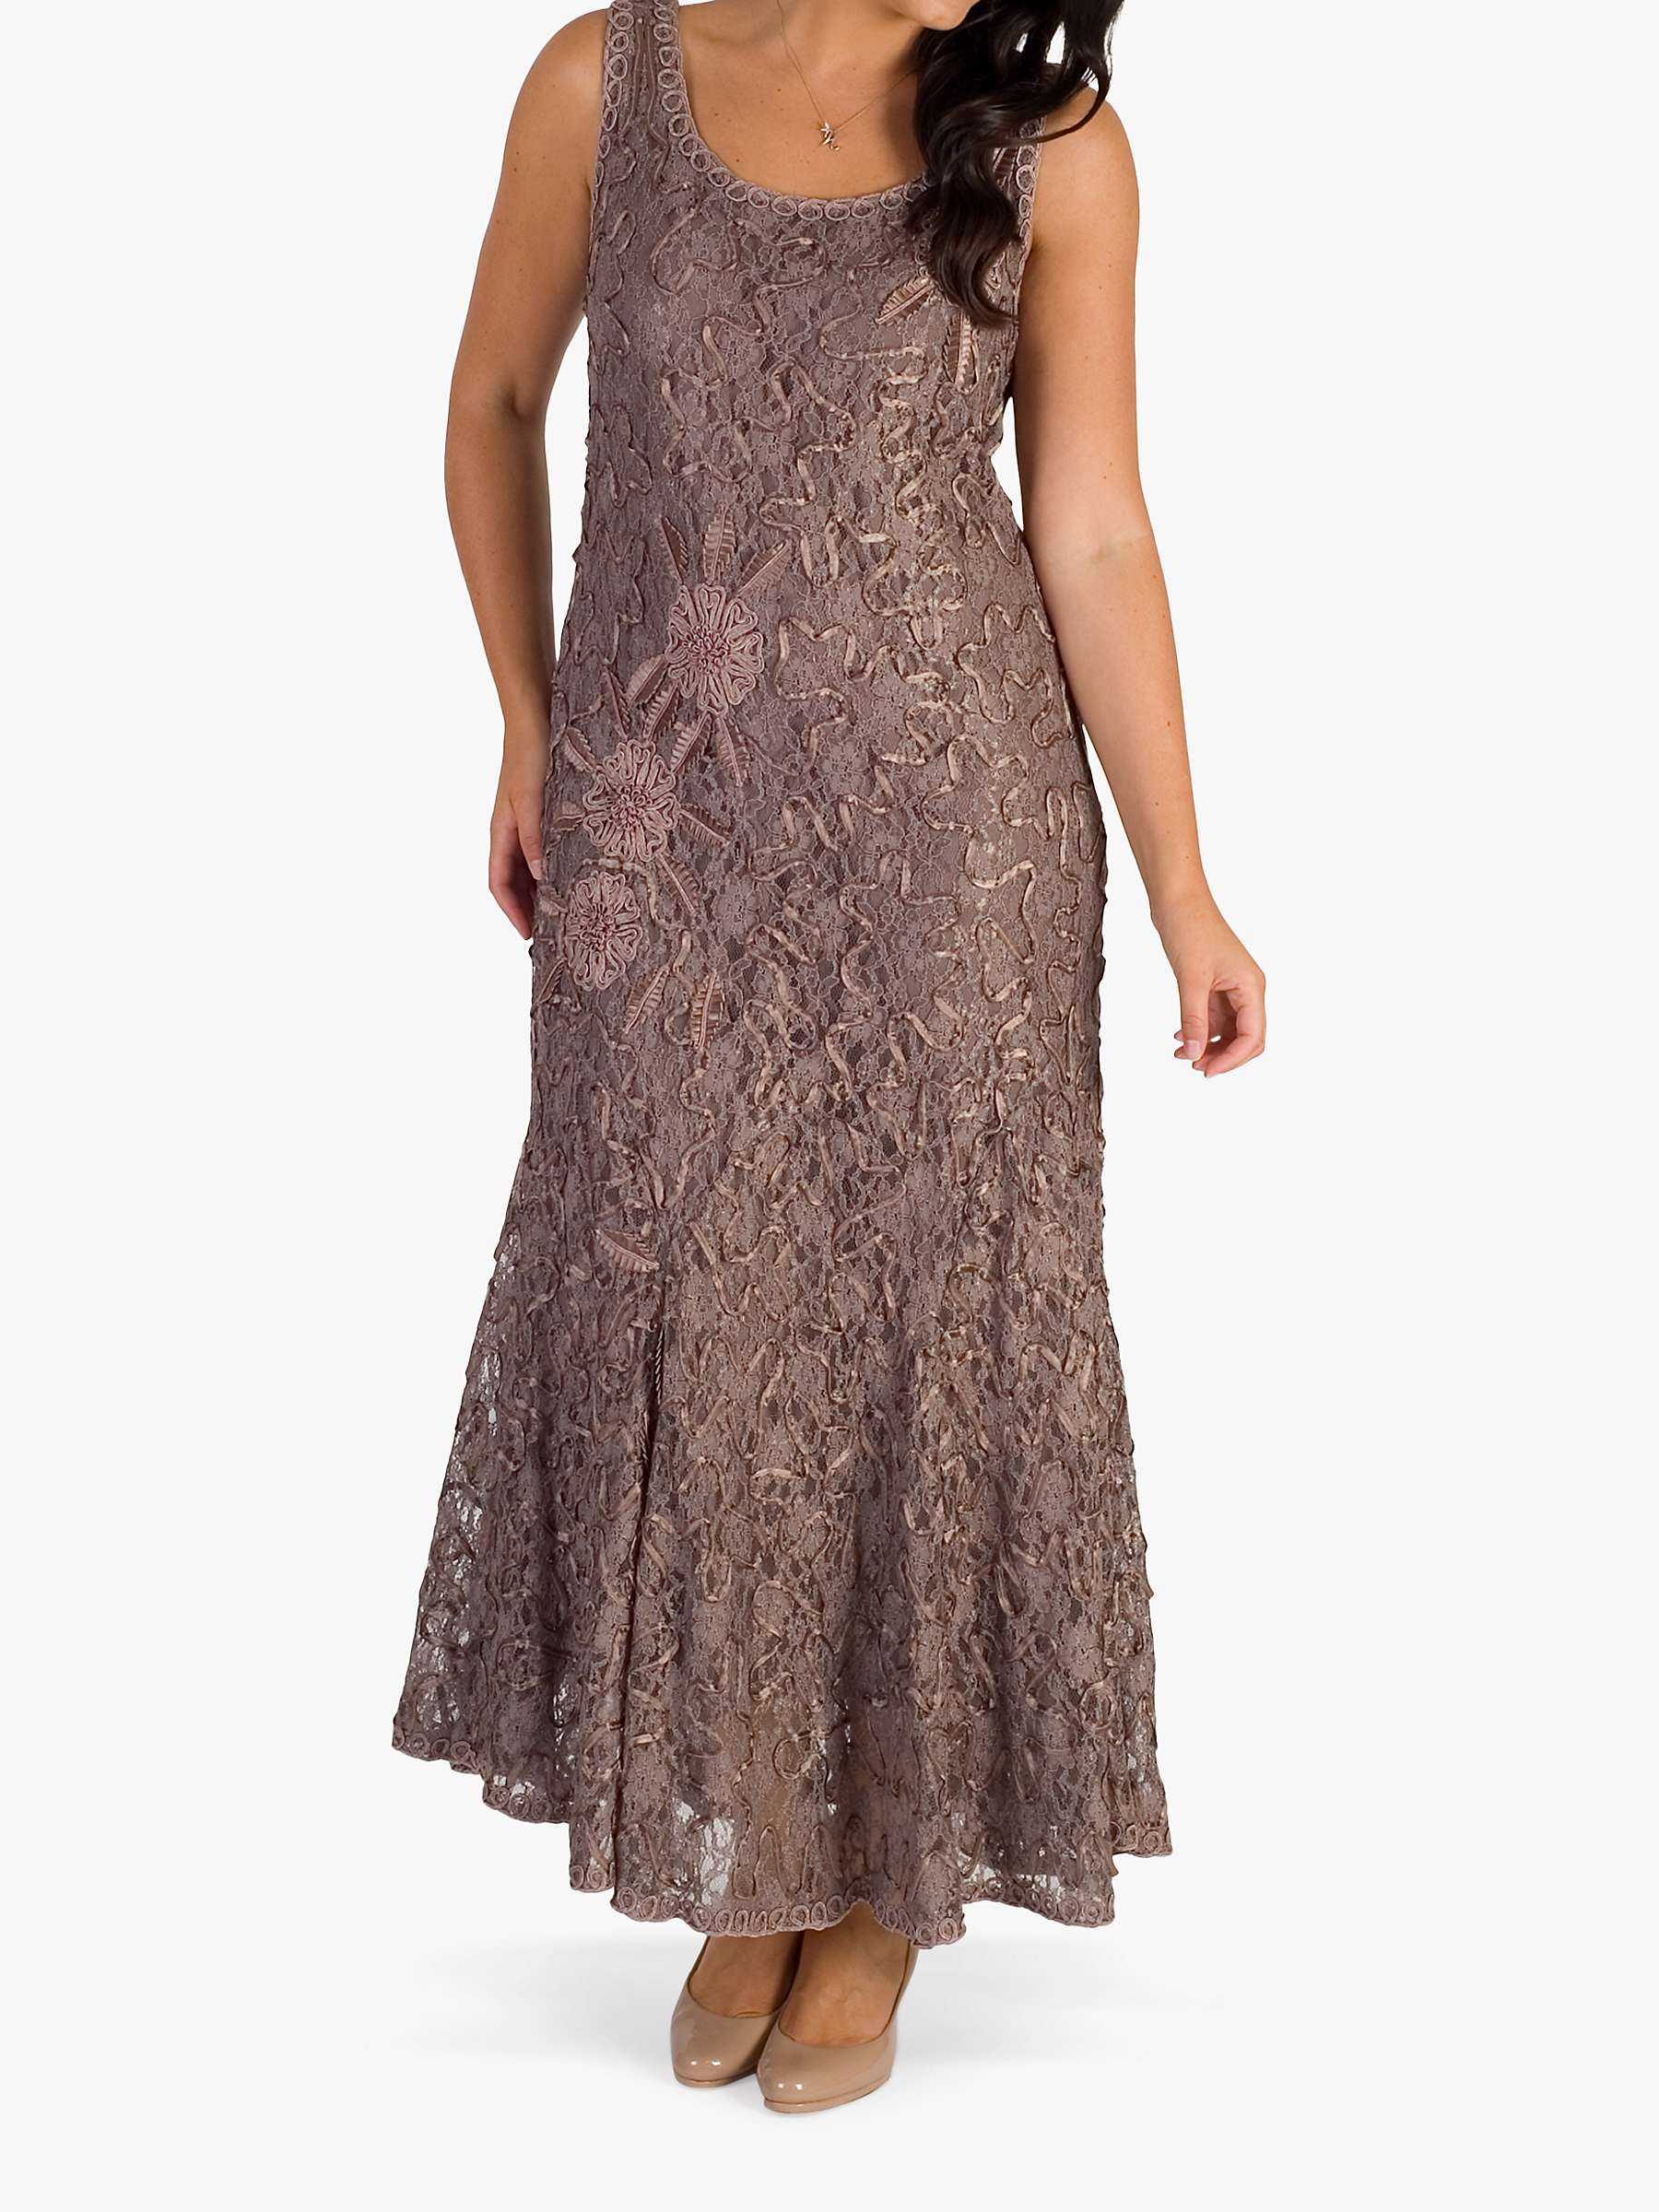 Buy Chesca Lace Cornelli Embroidered Dress Online at johnlewis.com